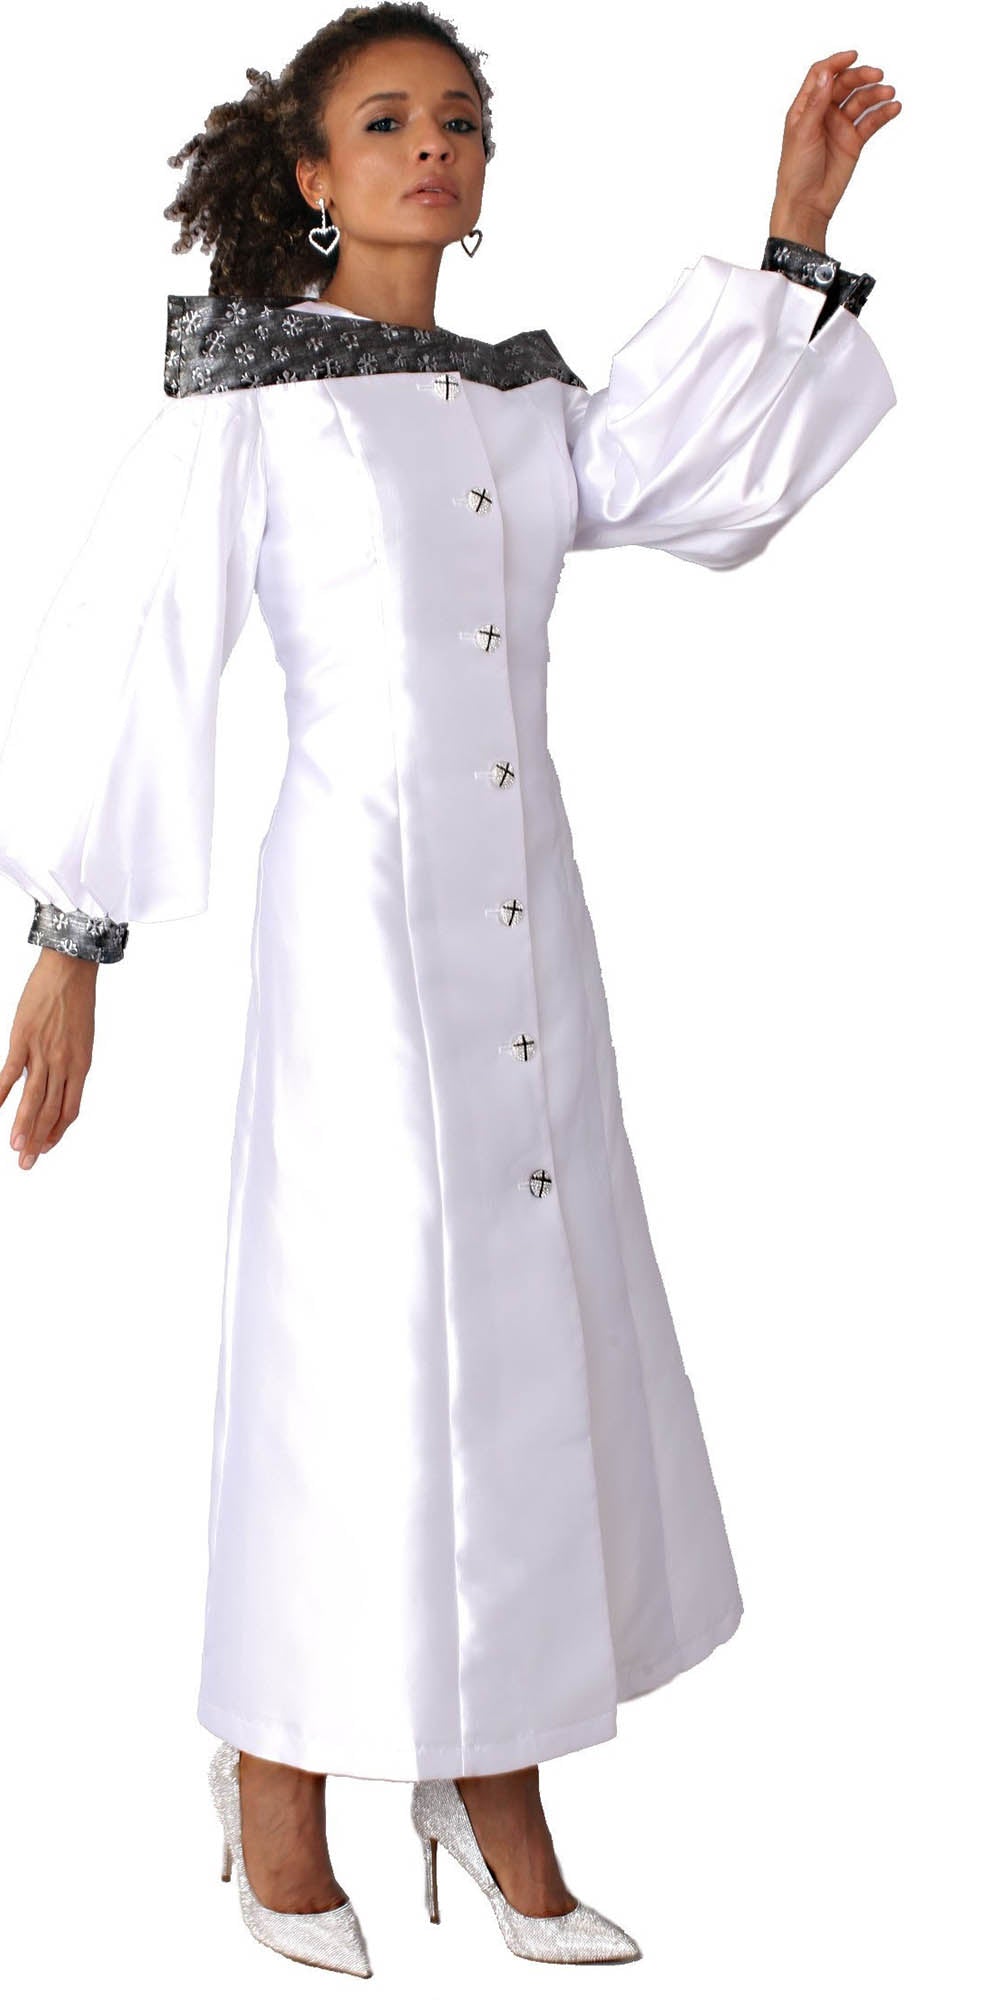 Tally Taylor - 4803 - White - Women's Bishop Sleeve Clergy Robe with Contrast Portrait Collar